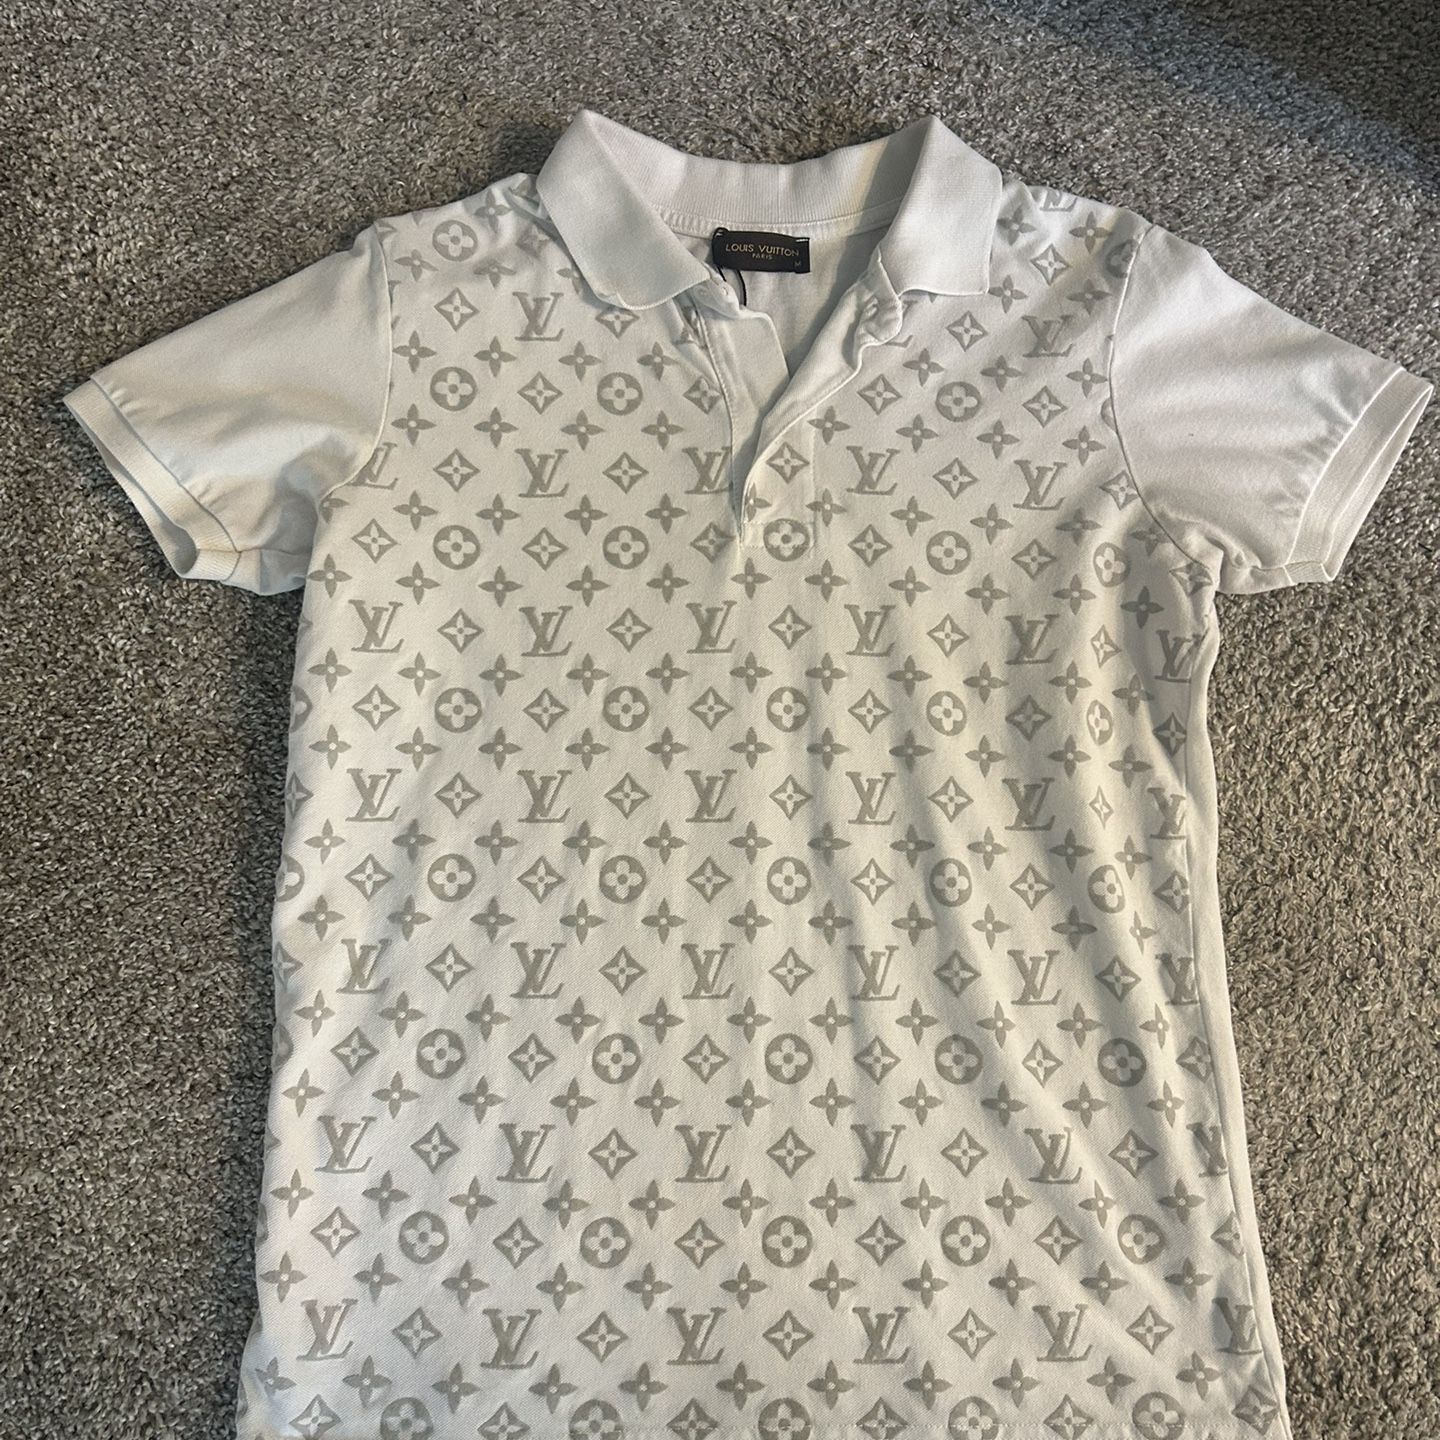 New Louis Vuitton Printed Logo Collar Long Sleeve Tee for Sale in San  Diego, CA - OfferUp